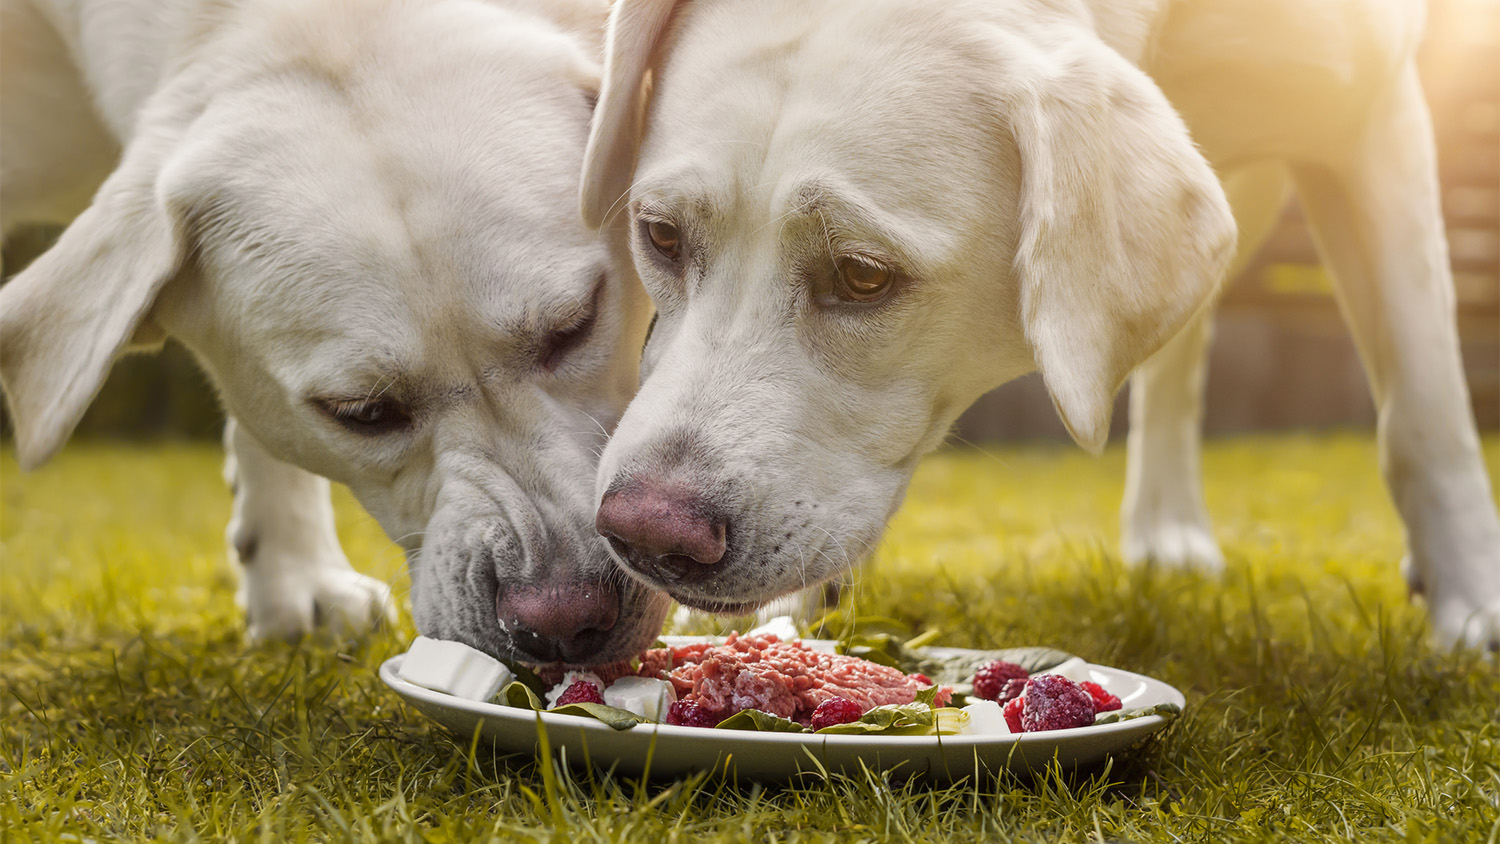 Dogs are increasingly fed portions of raw meat, offal, bones and other ingredients. (Picture: stock.com / manushot)